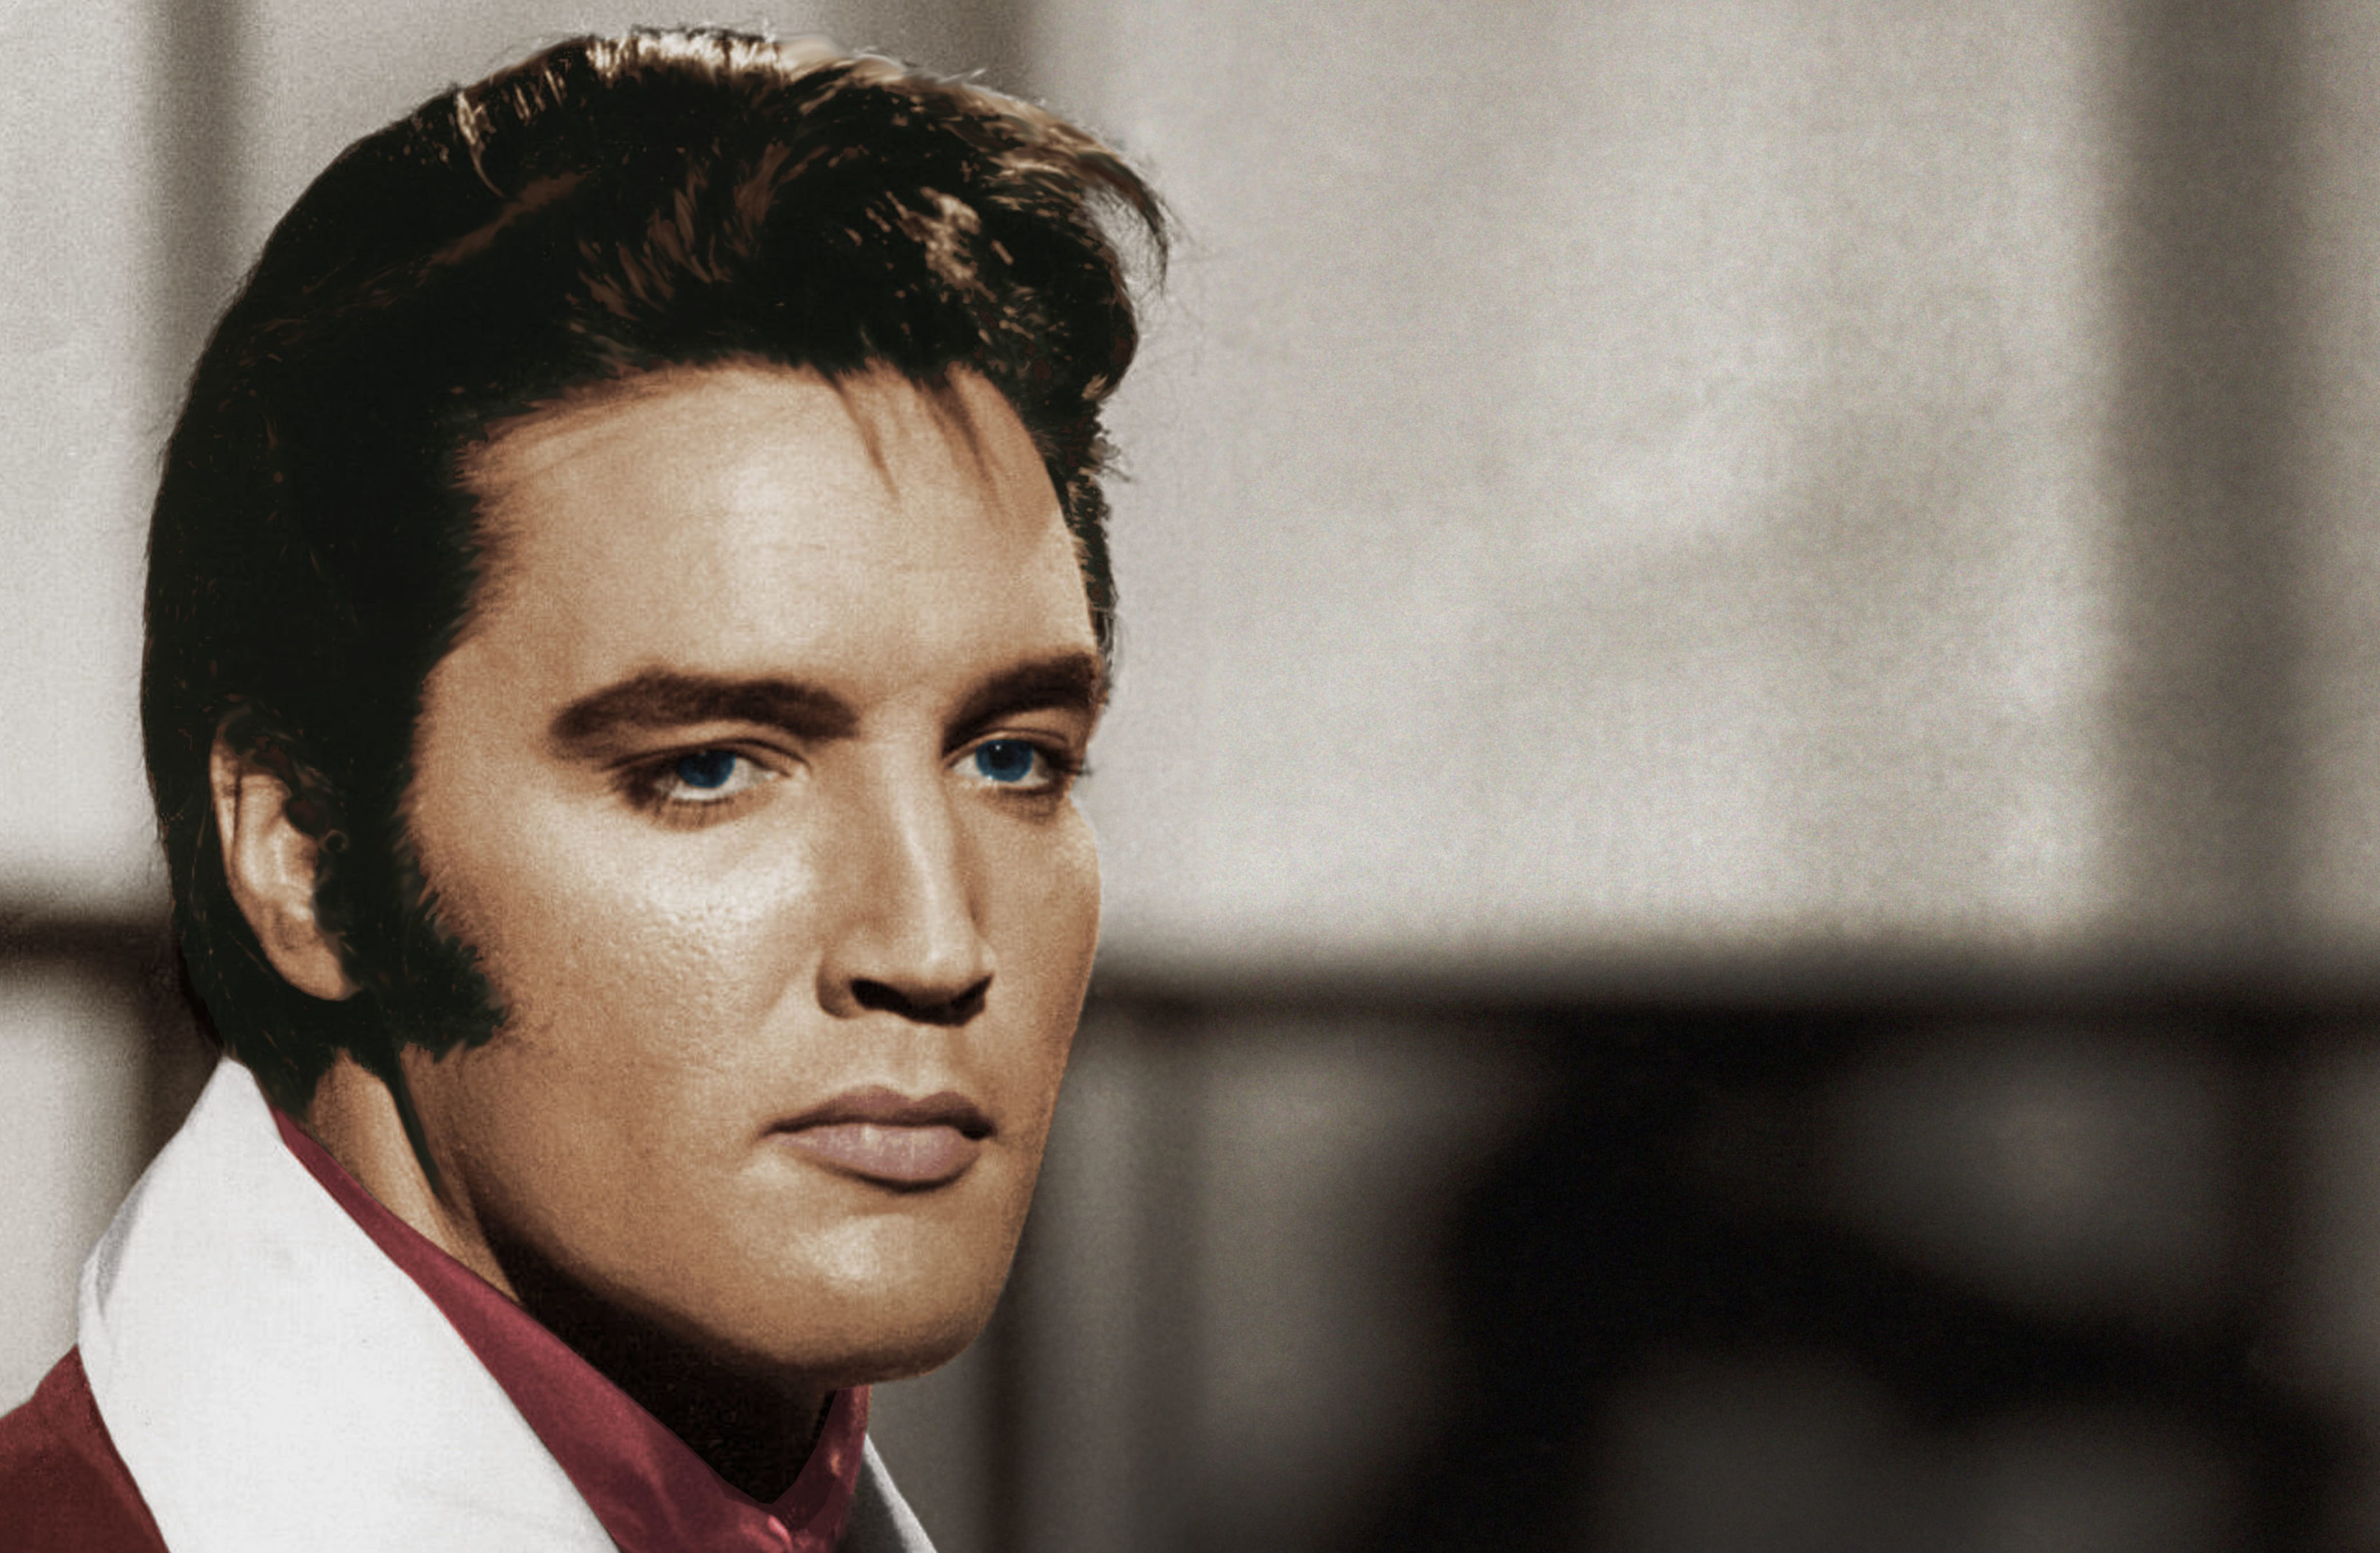 The new record is being released to celebrate Presley's love of gospel music (Elvis Presley Enterprises/PA Wire)